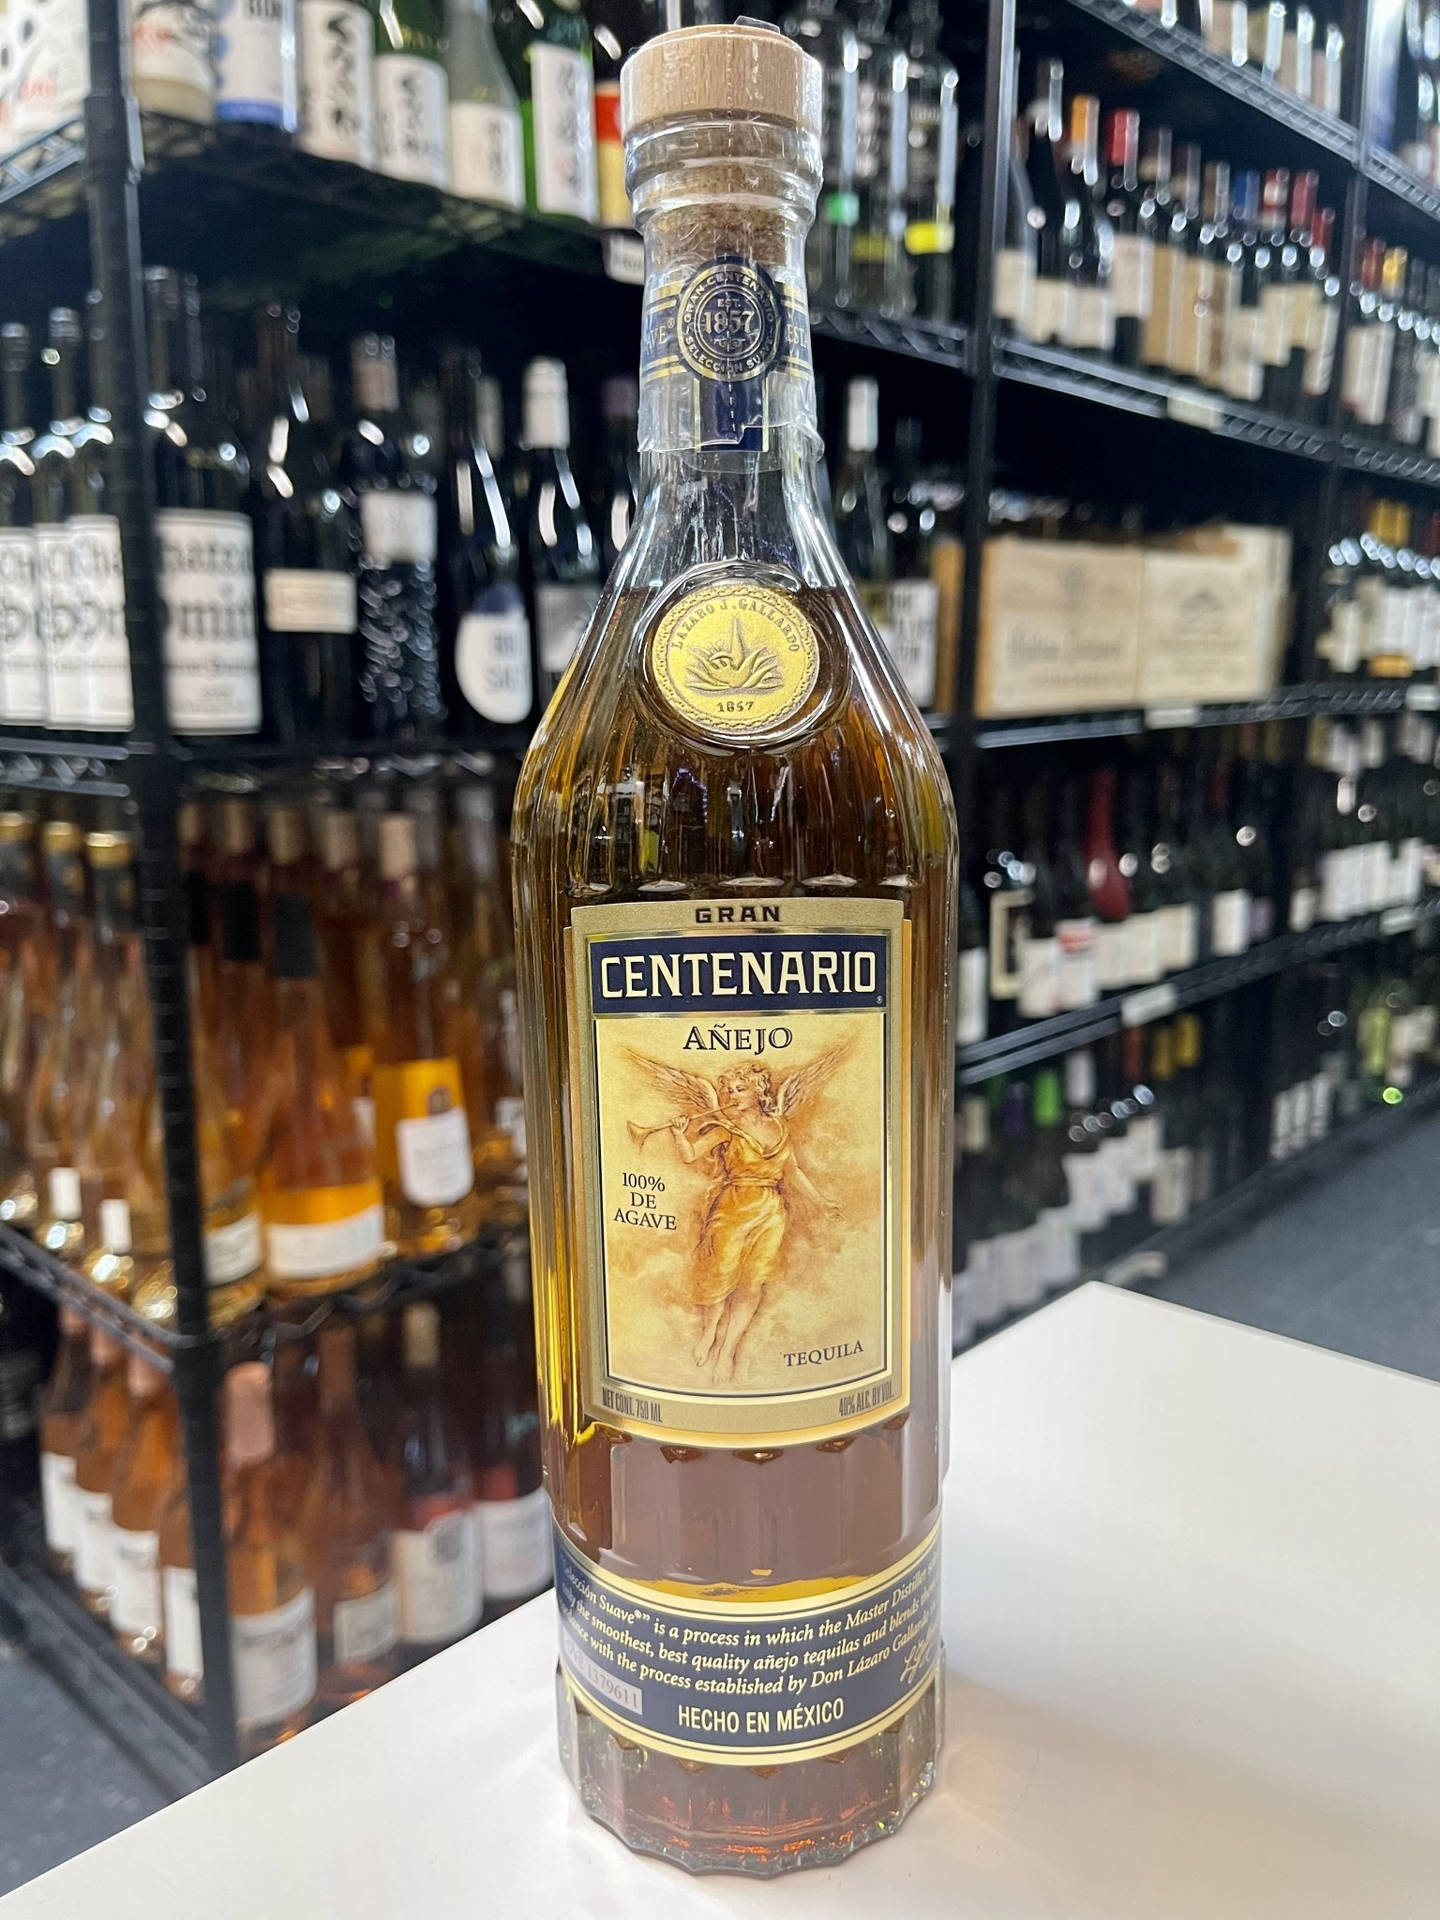 Grandcentenario Tequila Añejo På Mataffären. (note: This Sentence Does Not Relate To Computer Or Mobile Wallpaper. If You Provide More Specific Context, I Can Better Assist With The Translation.) Wallpaper